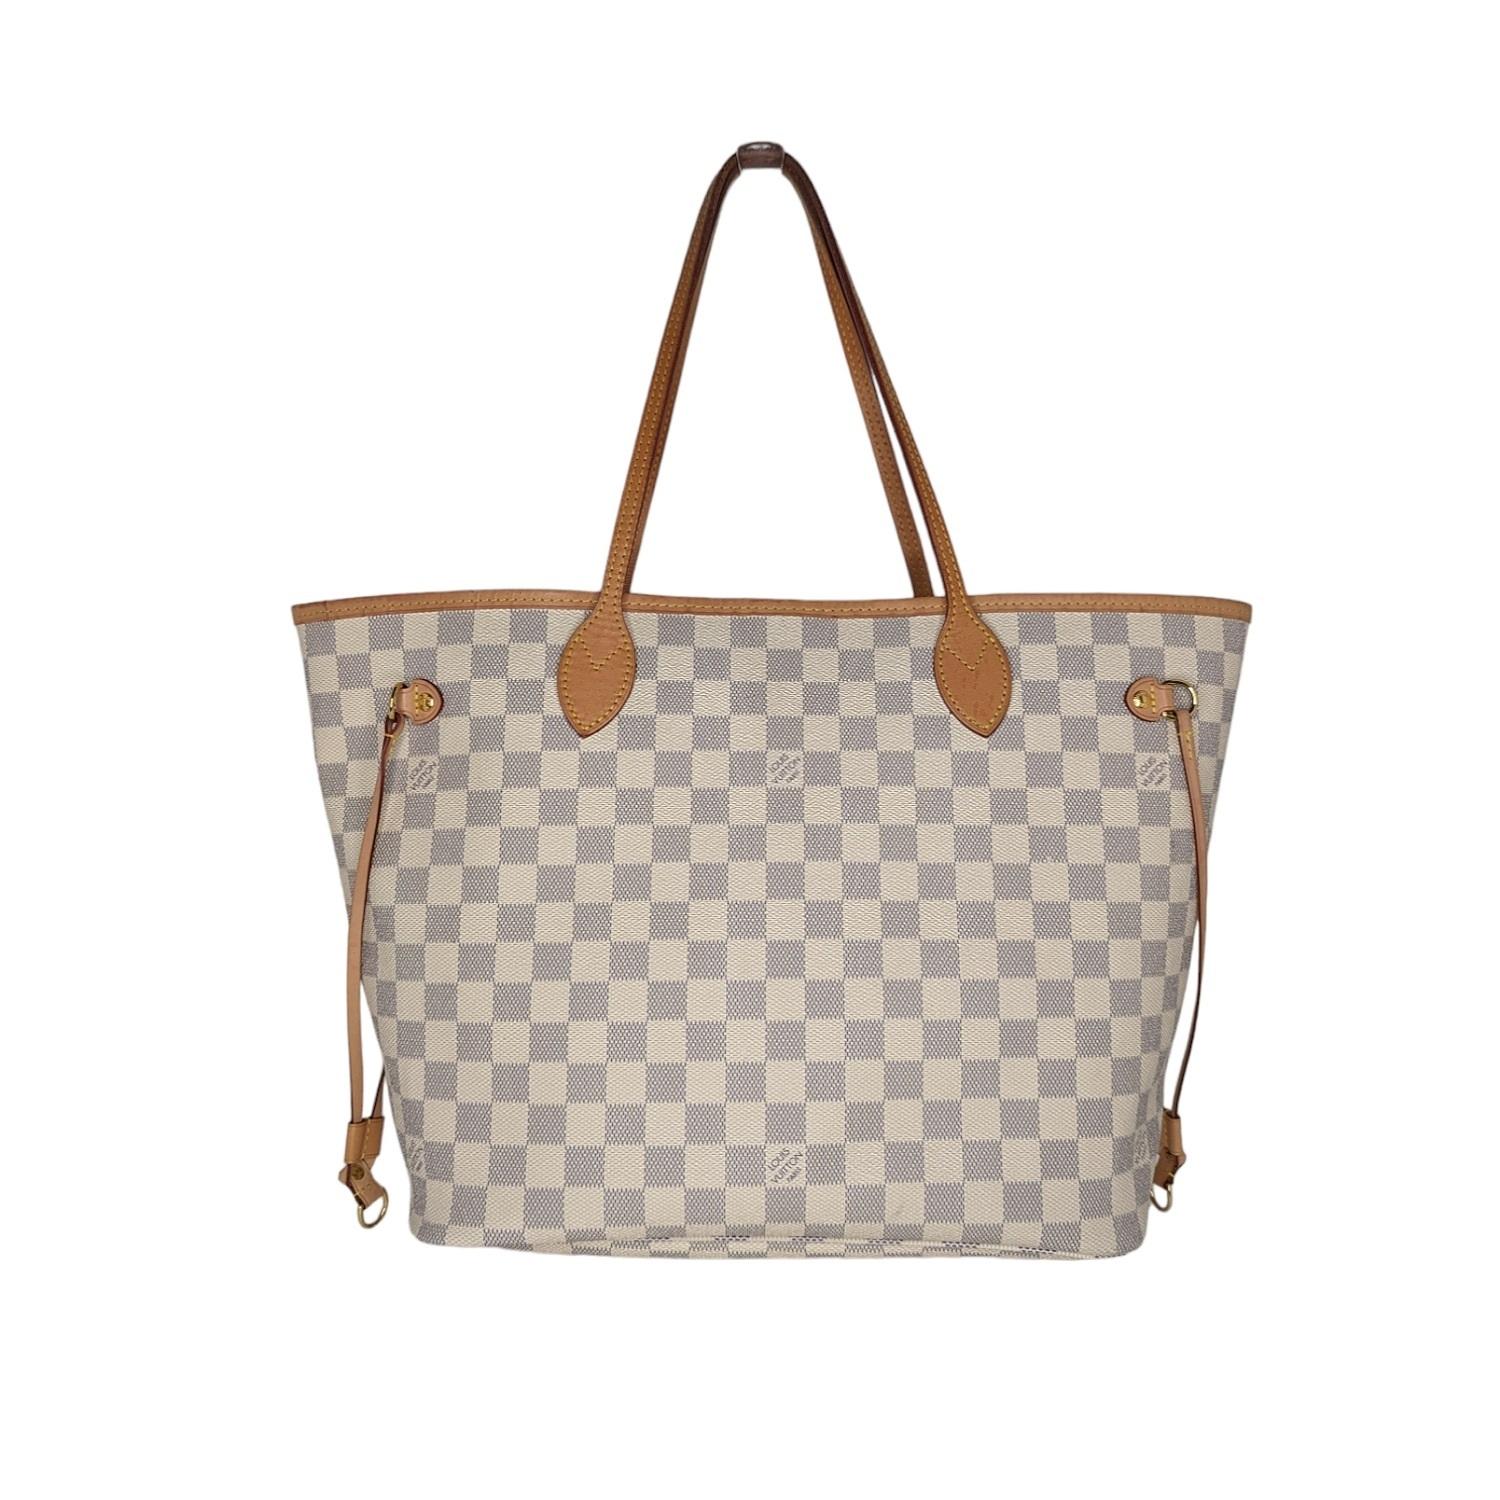 The Neverfull MM tote unites timeless design with heritage details. Made from fresh Damier Azur canvas with natural cowhide trim, it is roomy yet not bulky, with side laces that cinch for a sleek allure or loosen for a casual look. The slim leather